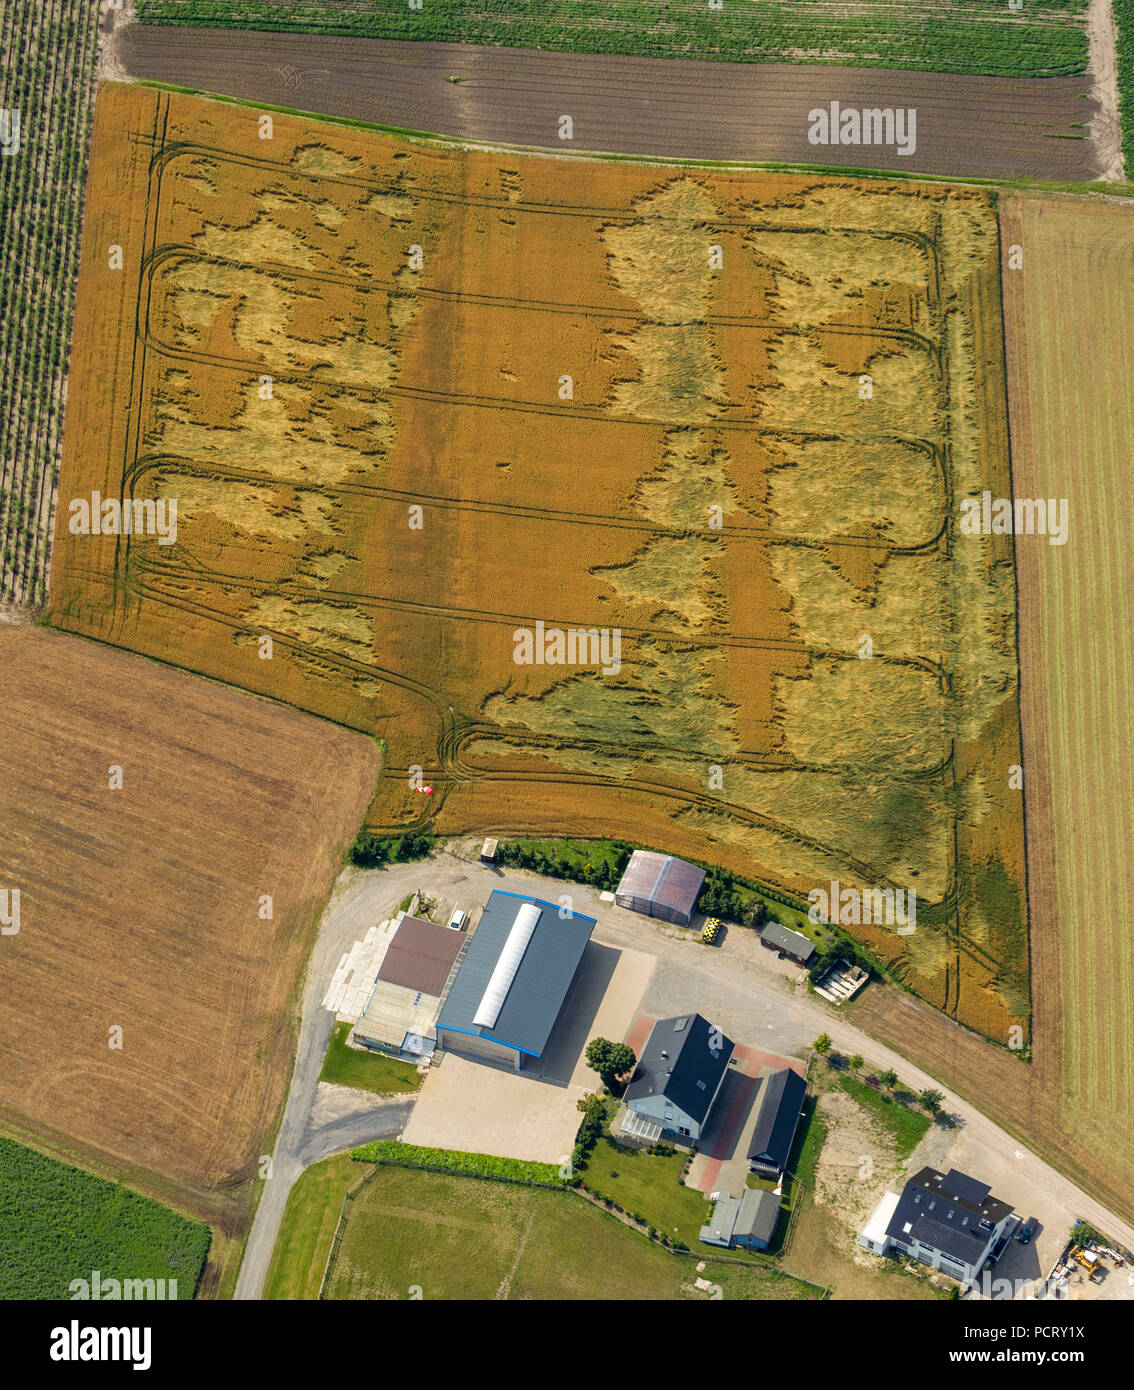 Aerial view, fields, field pattern, Datteln New Park, NewPark, Rieselfelder(biological research station), future commercial area on the city limits Datteln and Waltrop, Datteln, Ruhr area, North Rhine-Westphalia, Germany, Europe Stock Photo